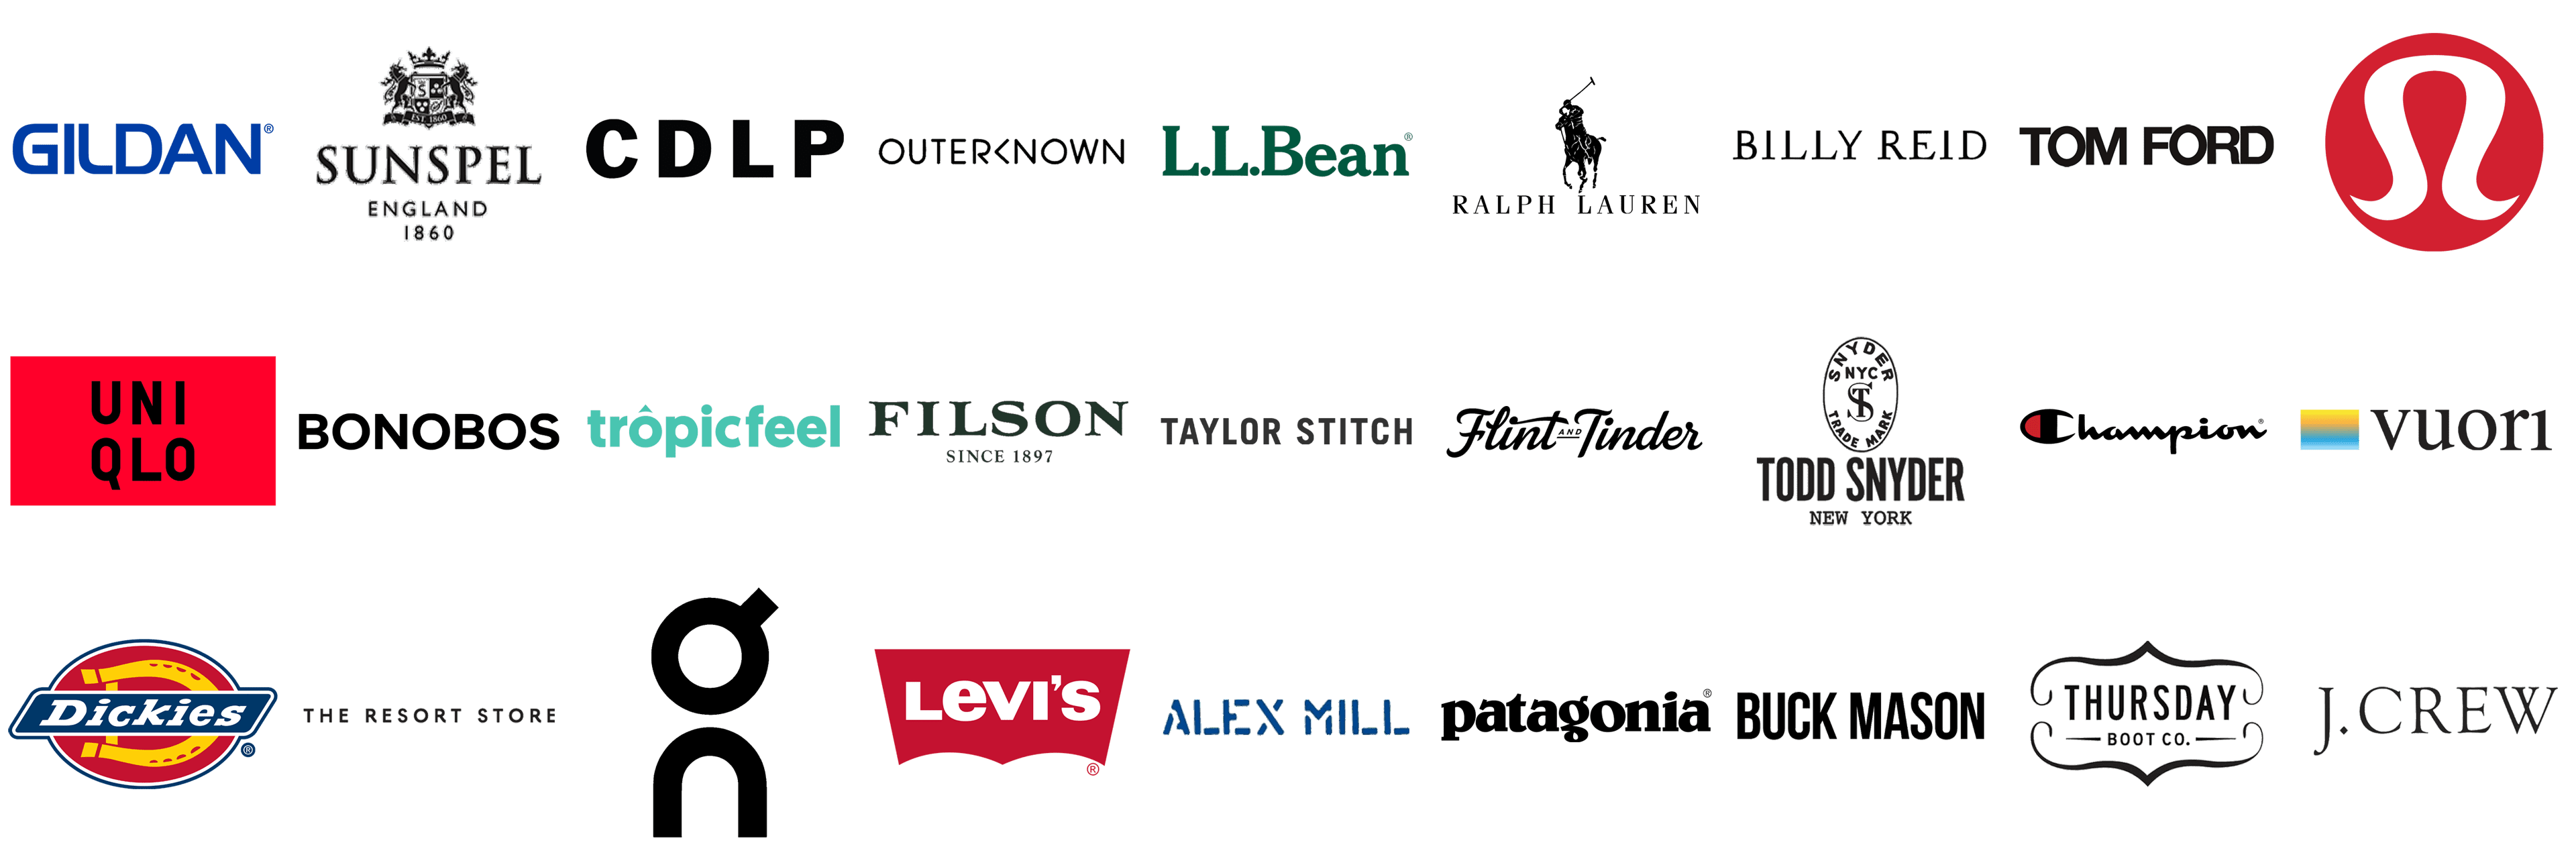 Clothing brands